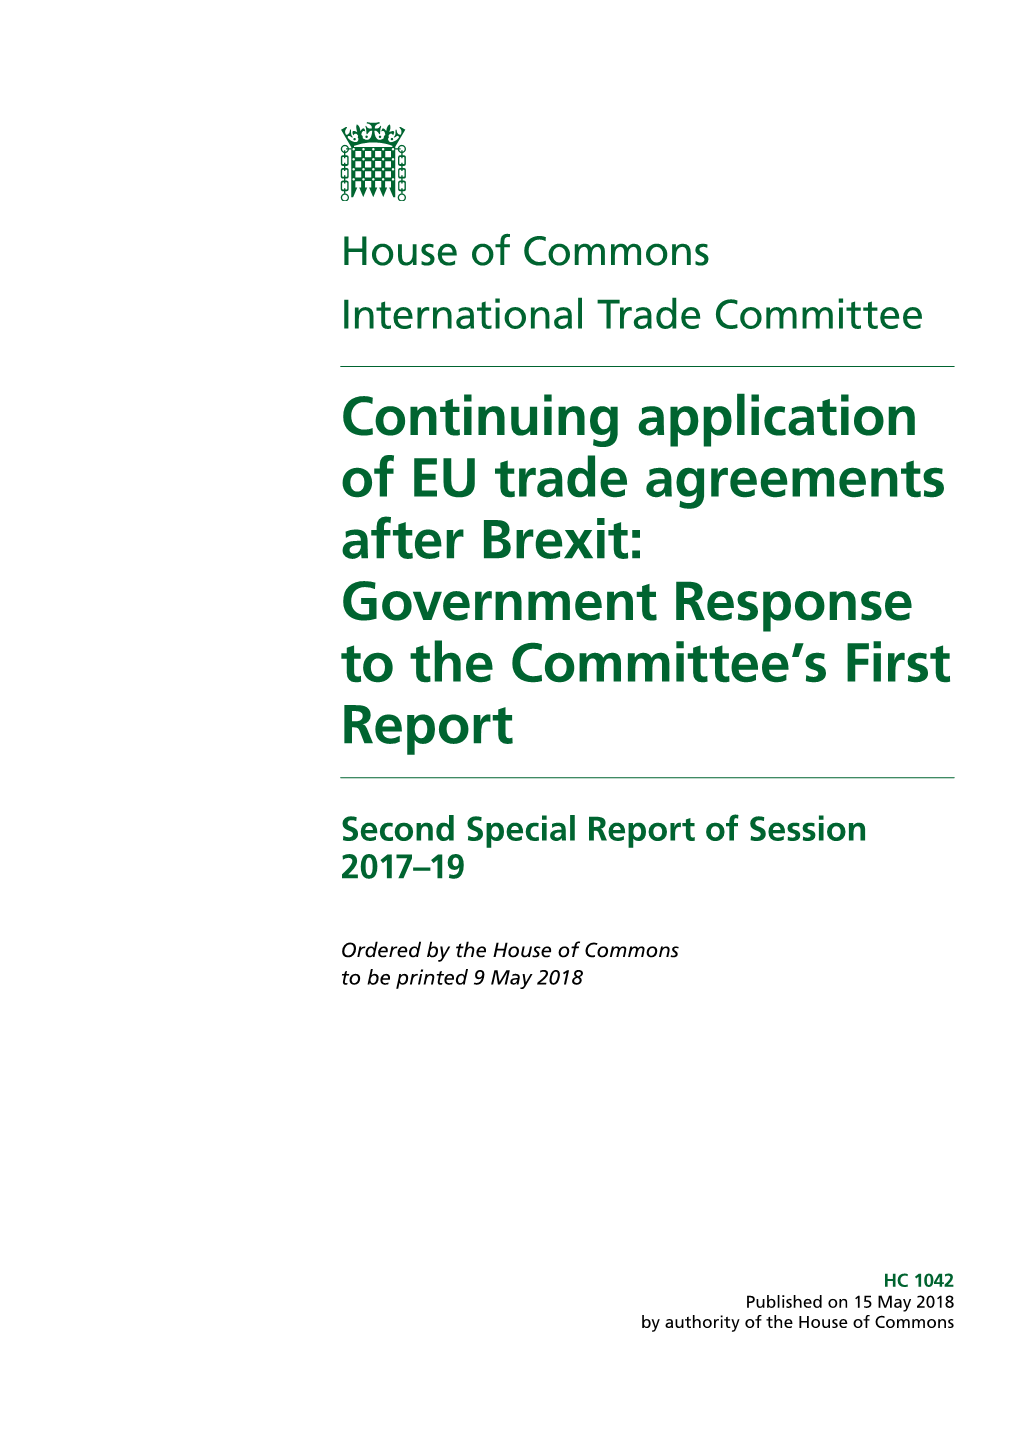 Continuing Application of EU Trade Agreements After Brexit: Government Response to the Committee’S First Report